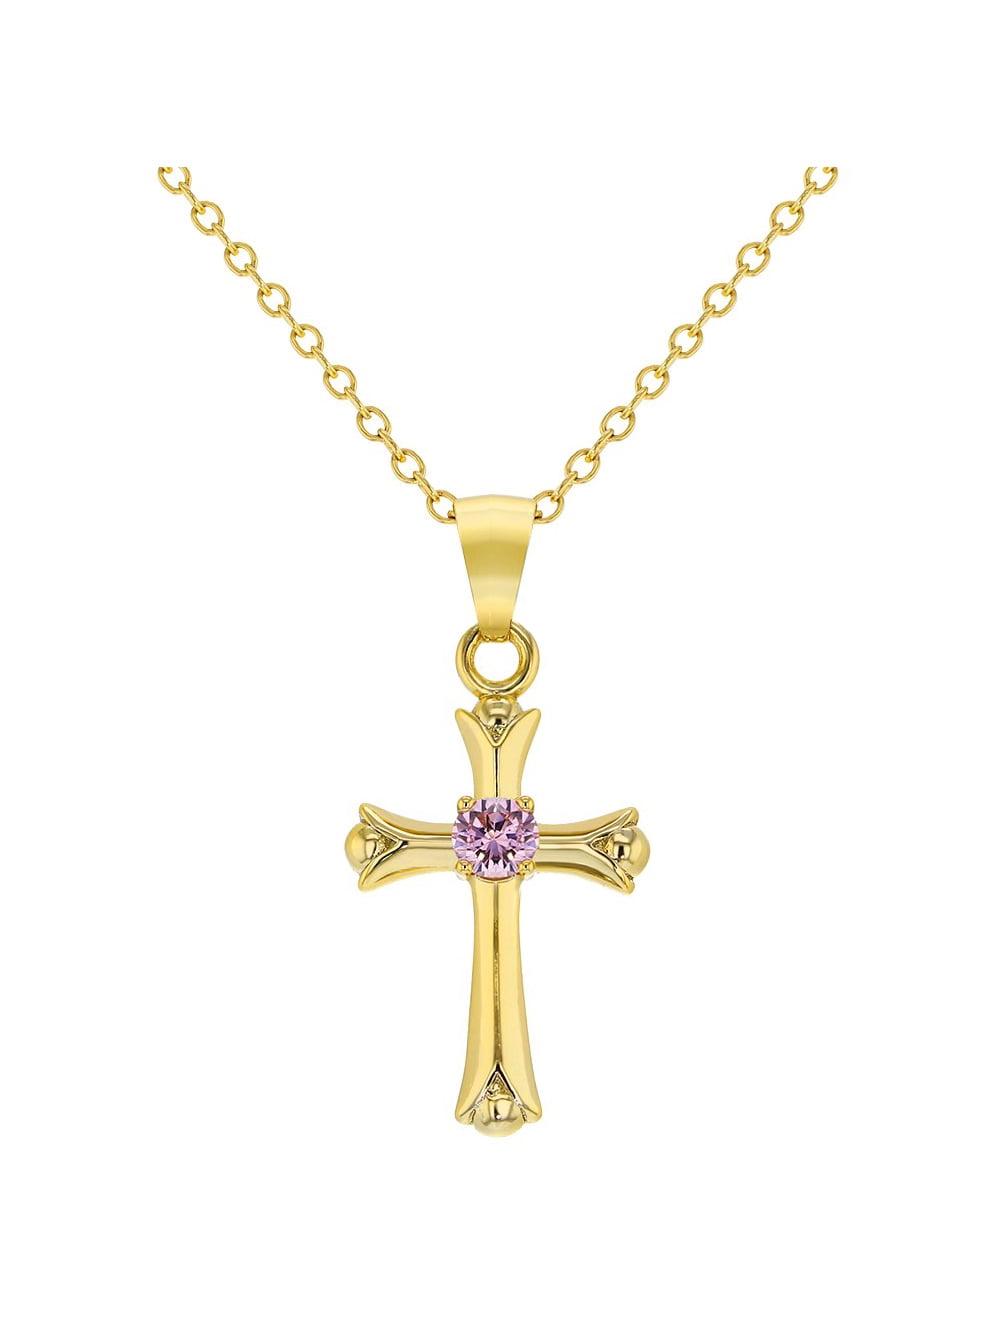 Gold Festive Multicolor Crystal Rhinestone Holy Cross Only Pendant Chic Jewelry